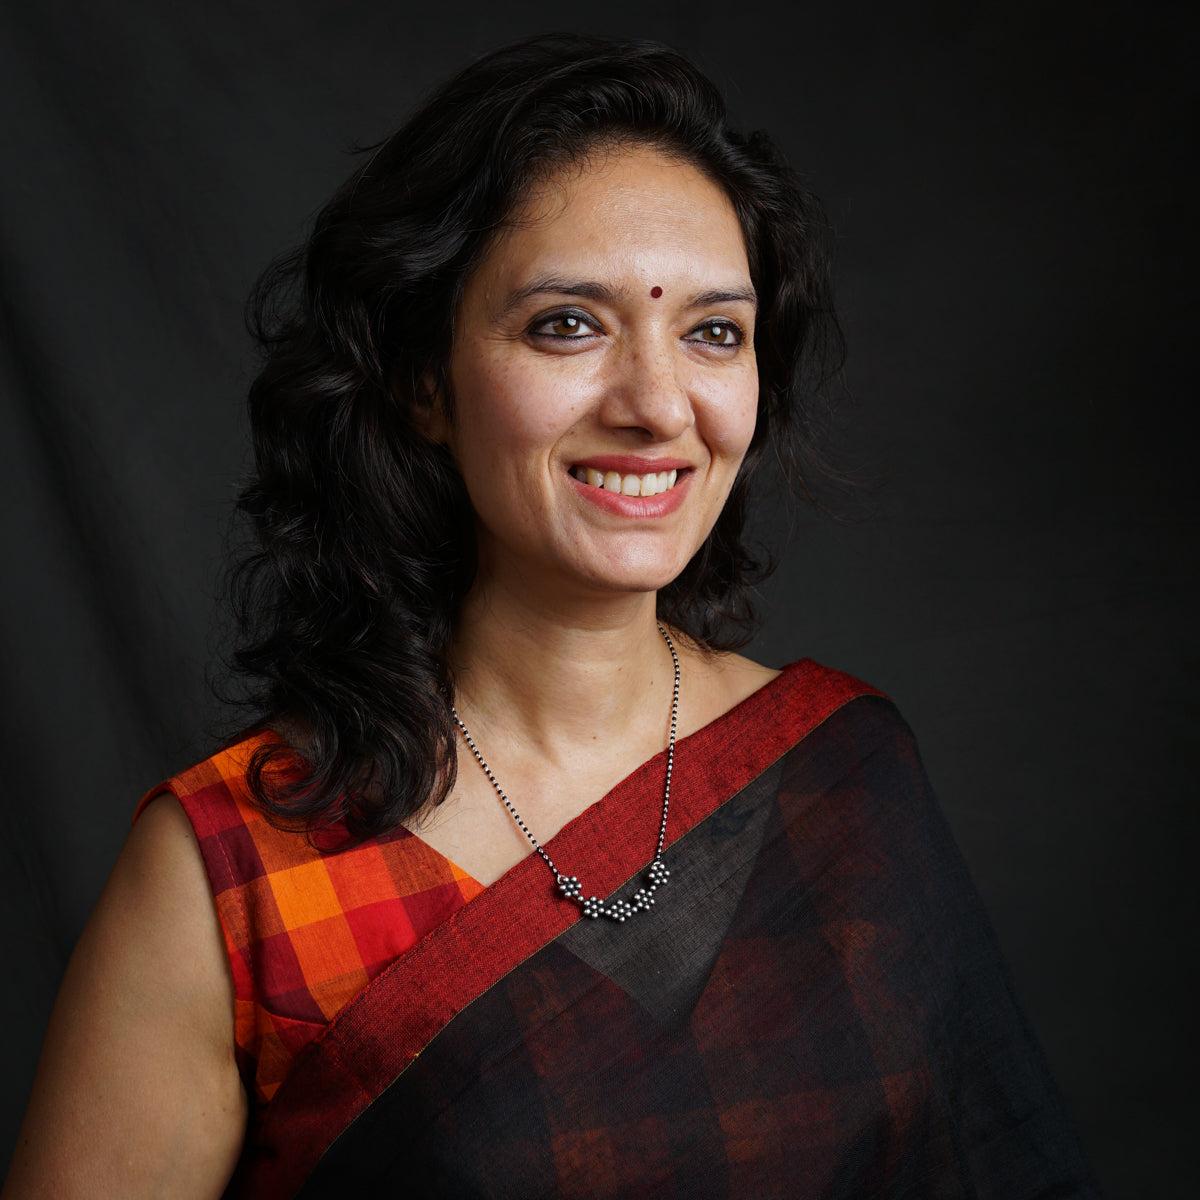 a woman in a red and black sari